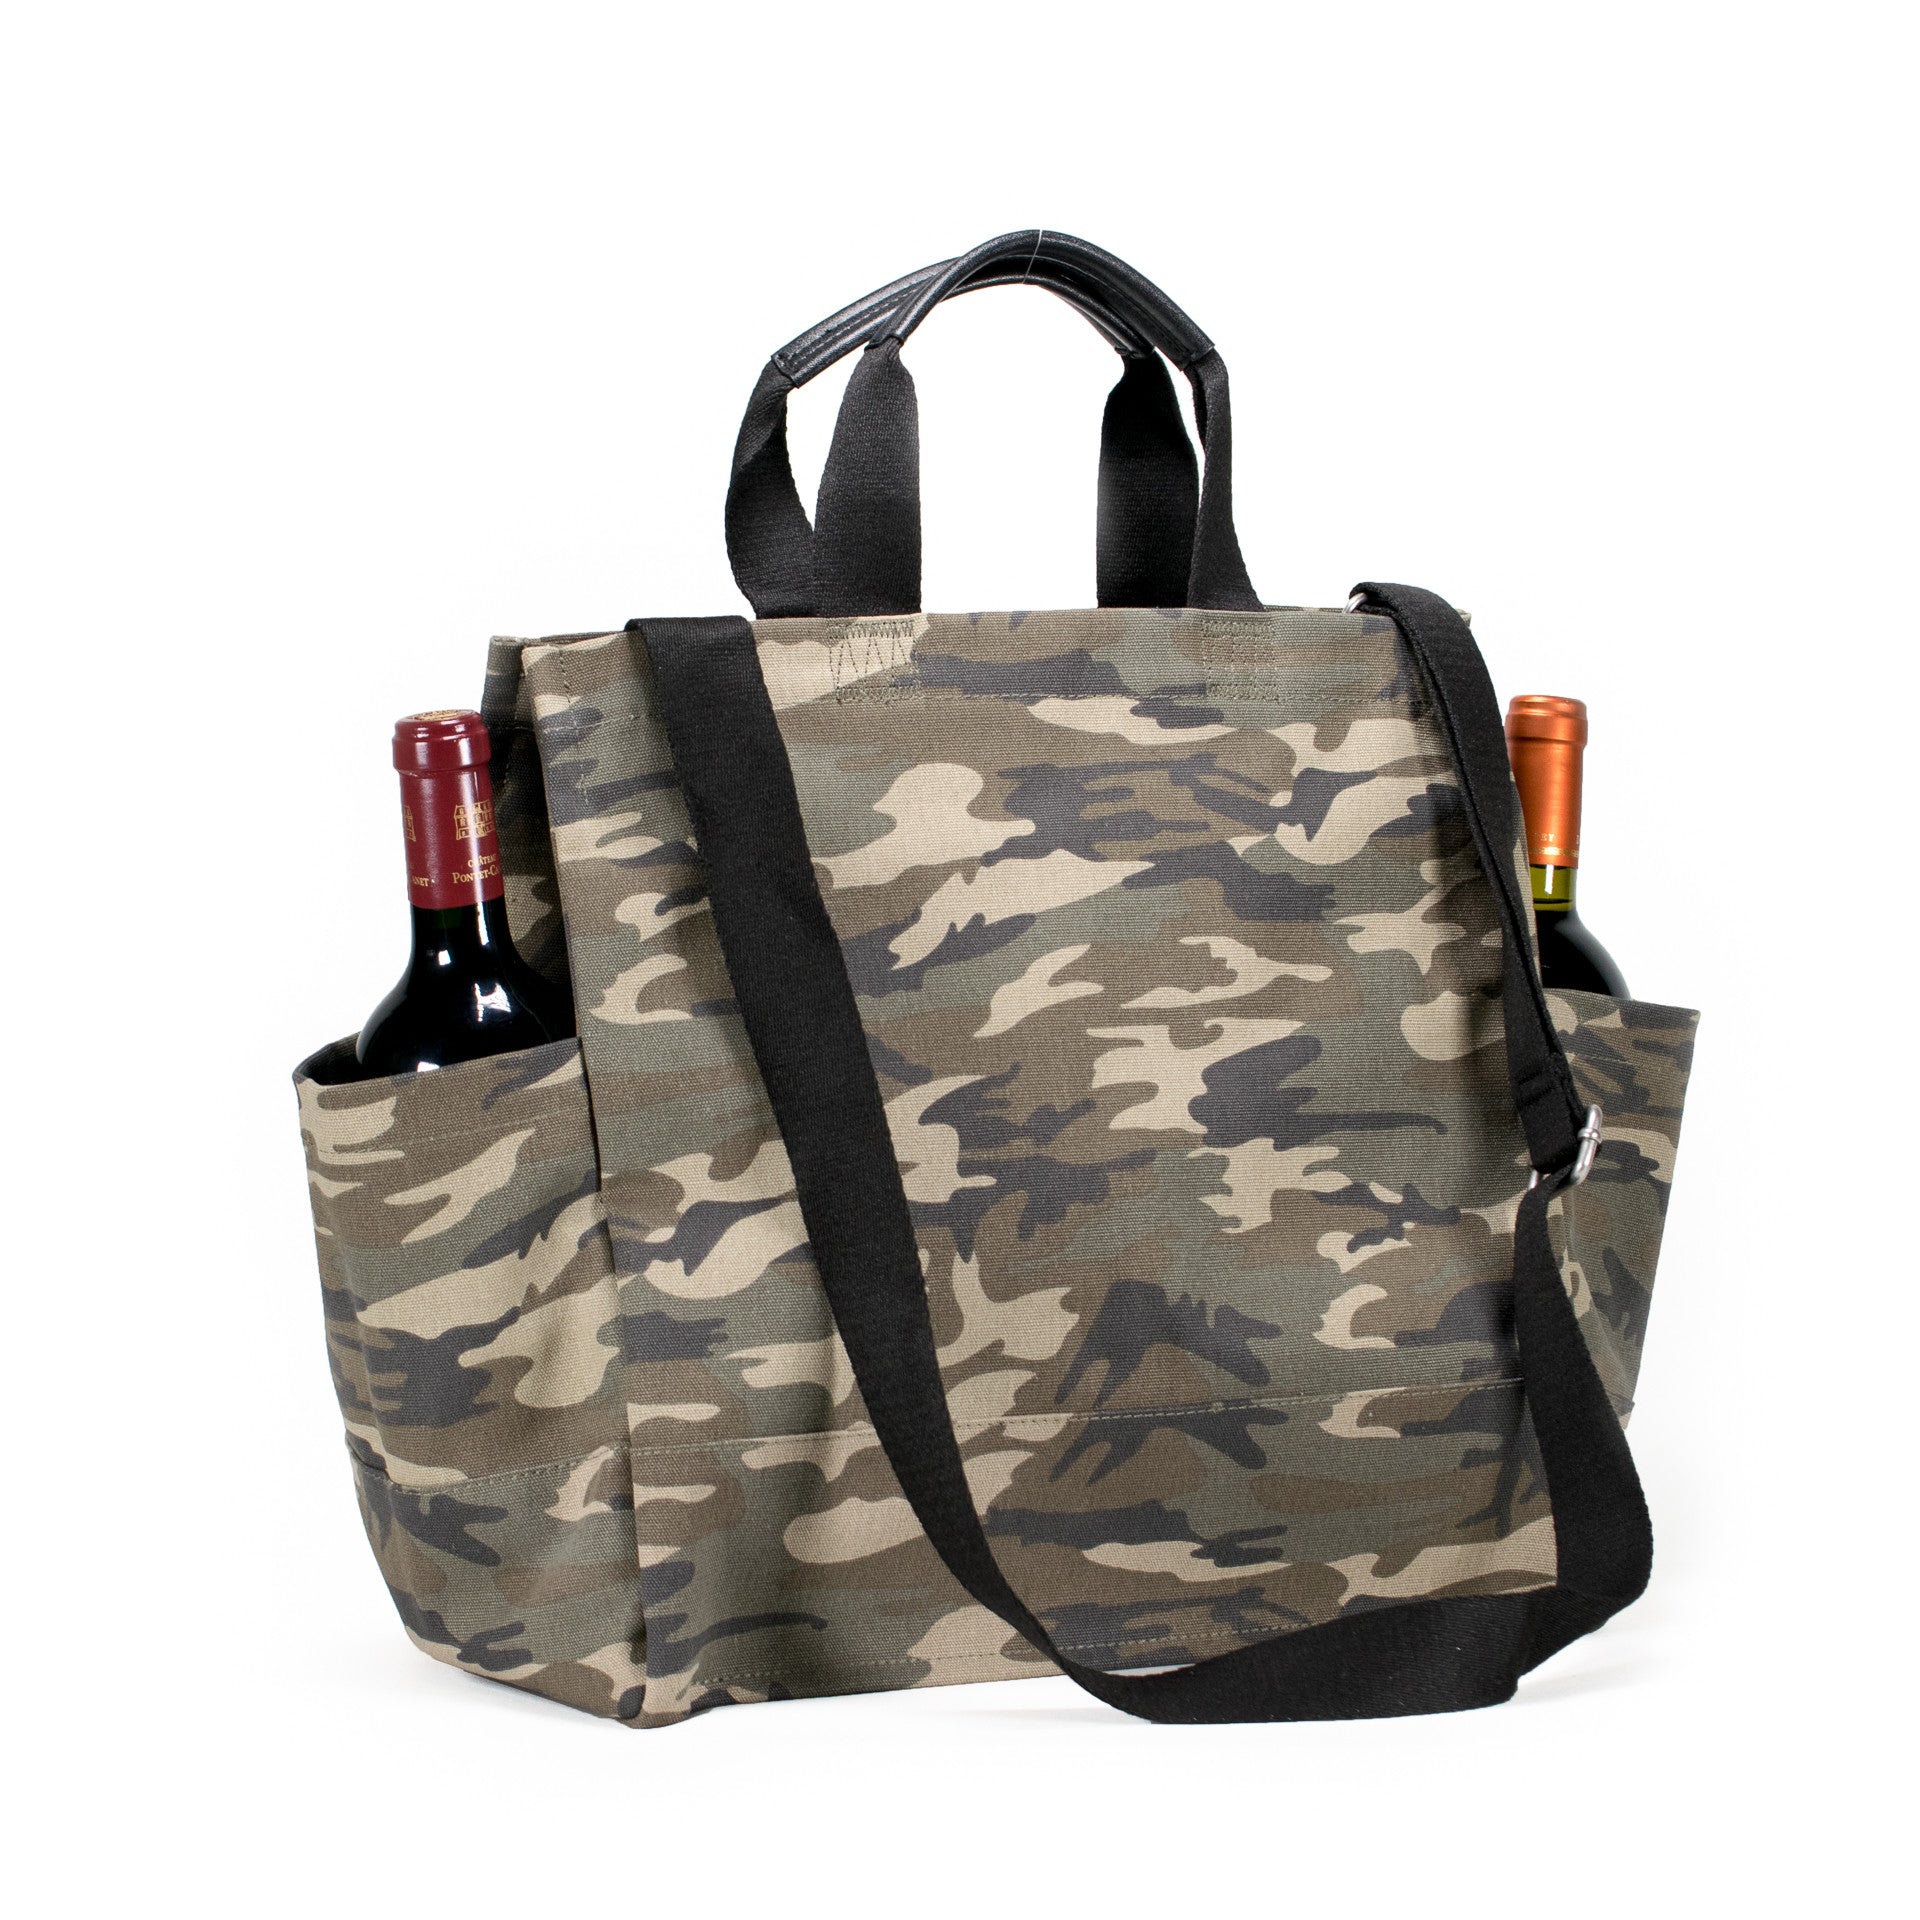 East-West Bag: Green Camouflage – Quilted Koala